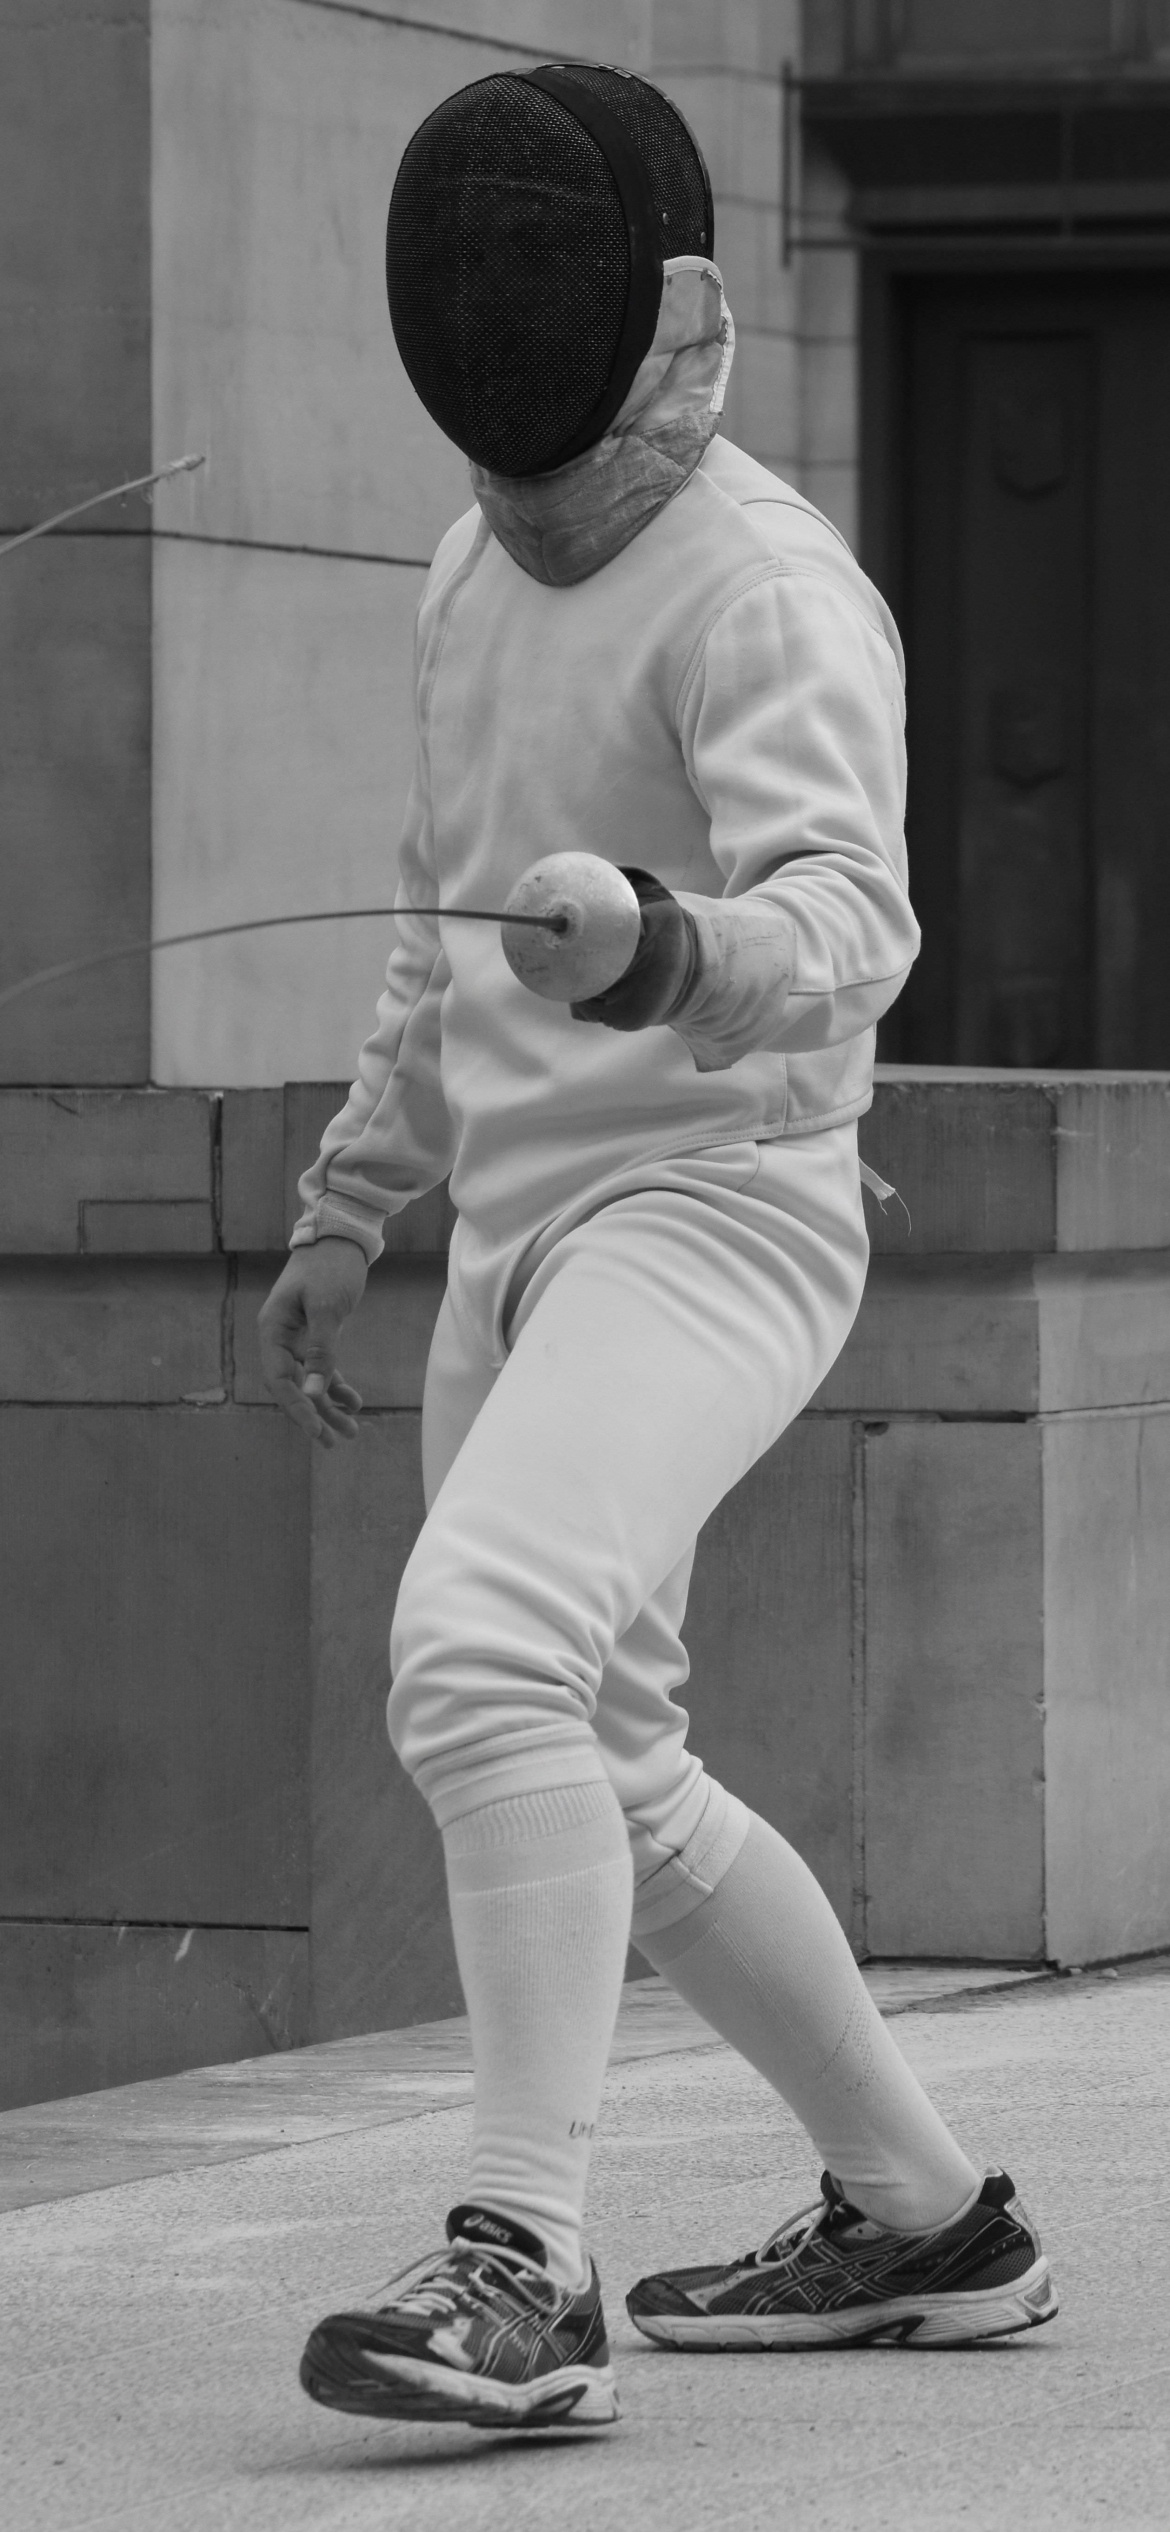 Fencing: Monochrome foil fencer, An athlete with the lightest weapon for the combat sports. 1170x2540 HD Background.